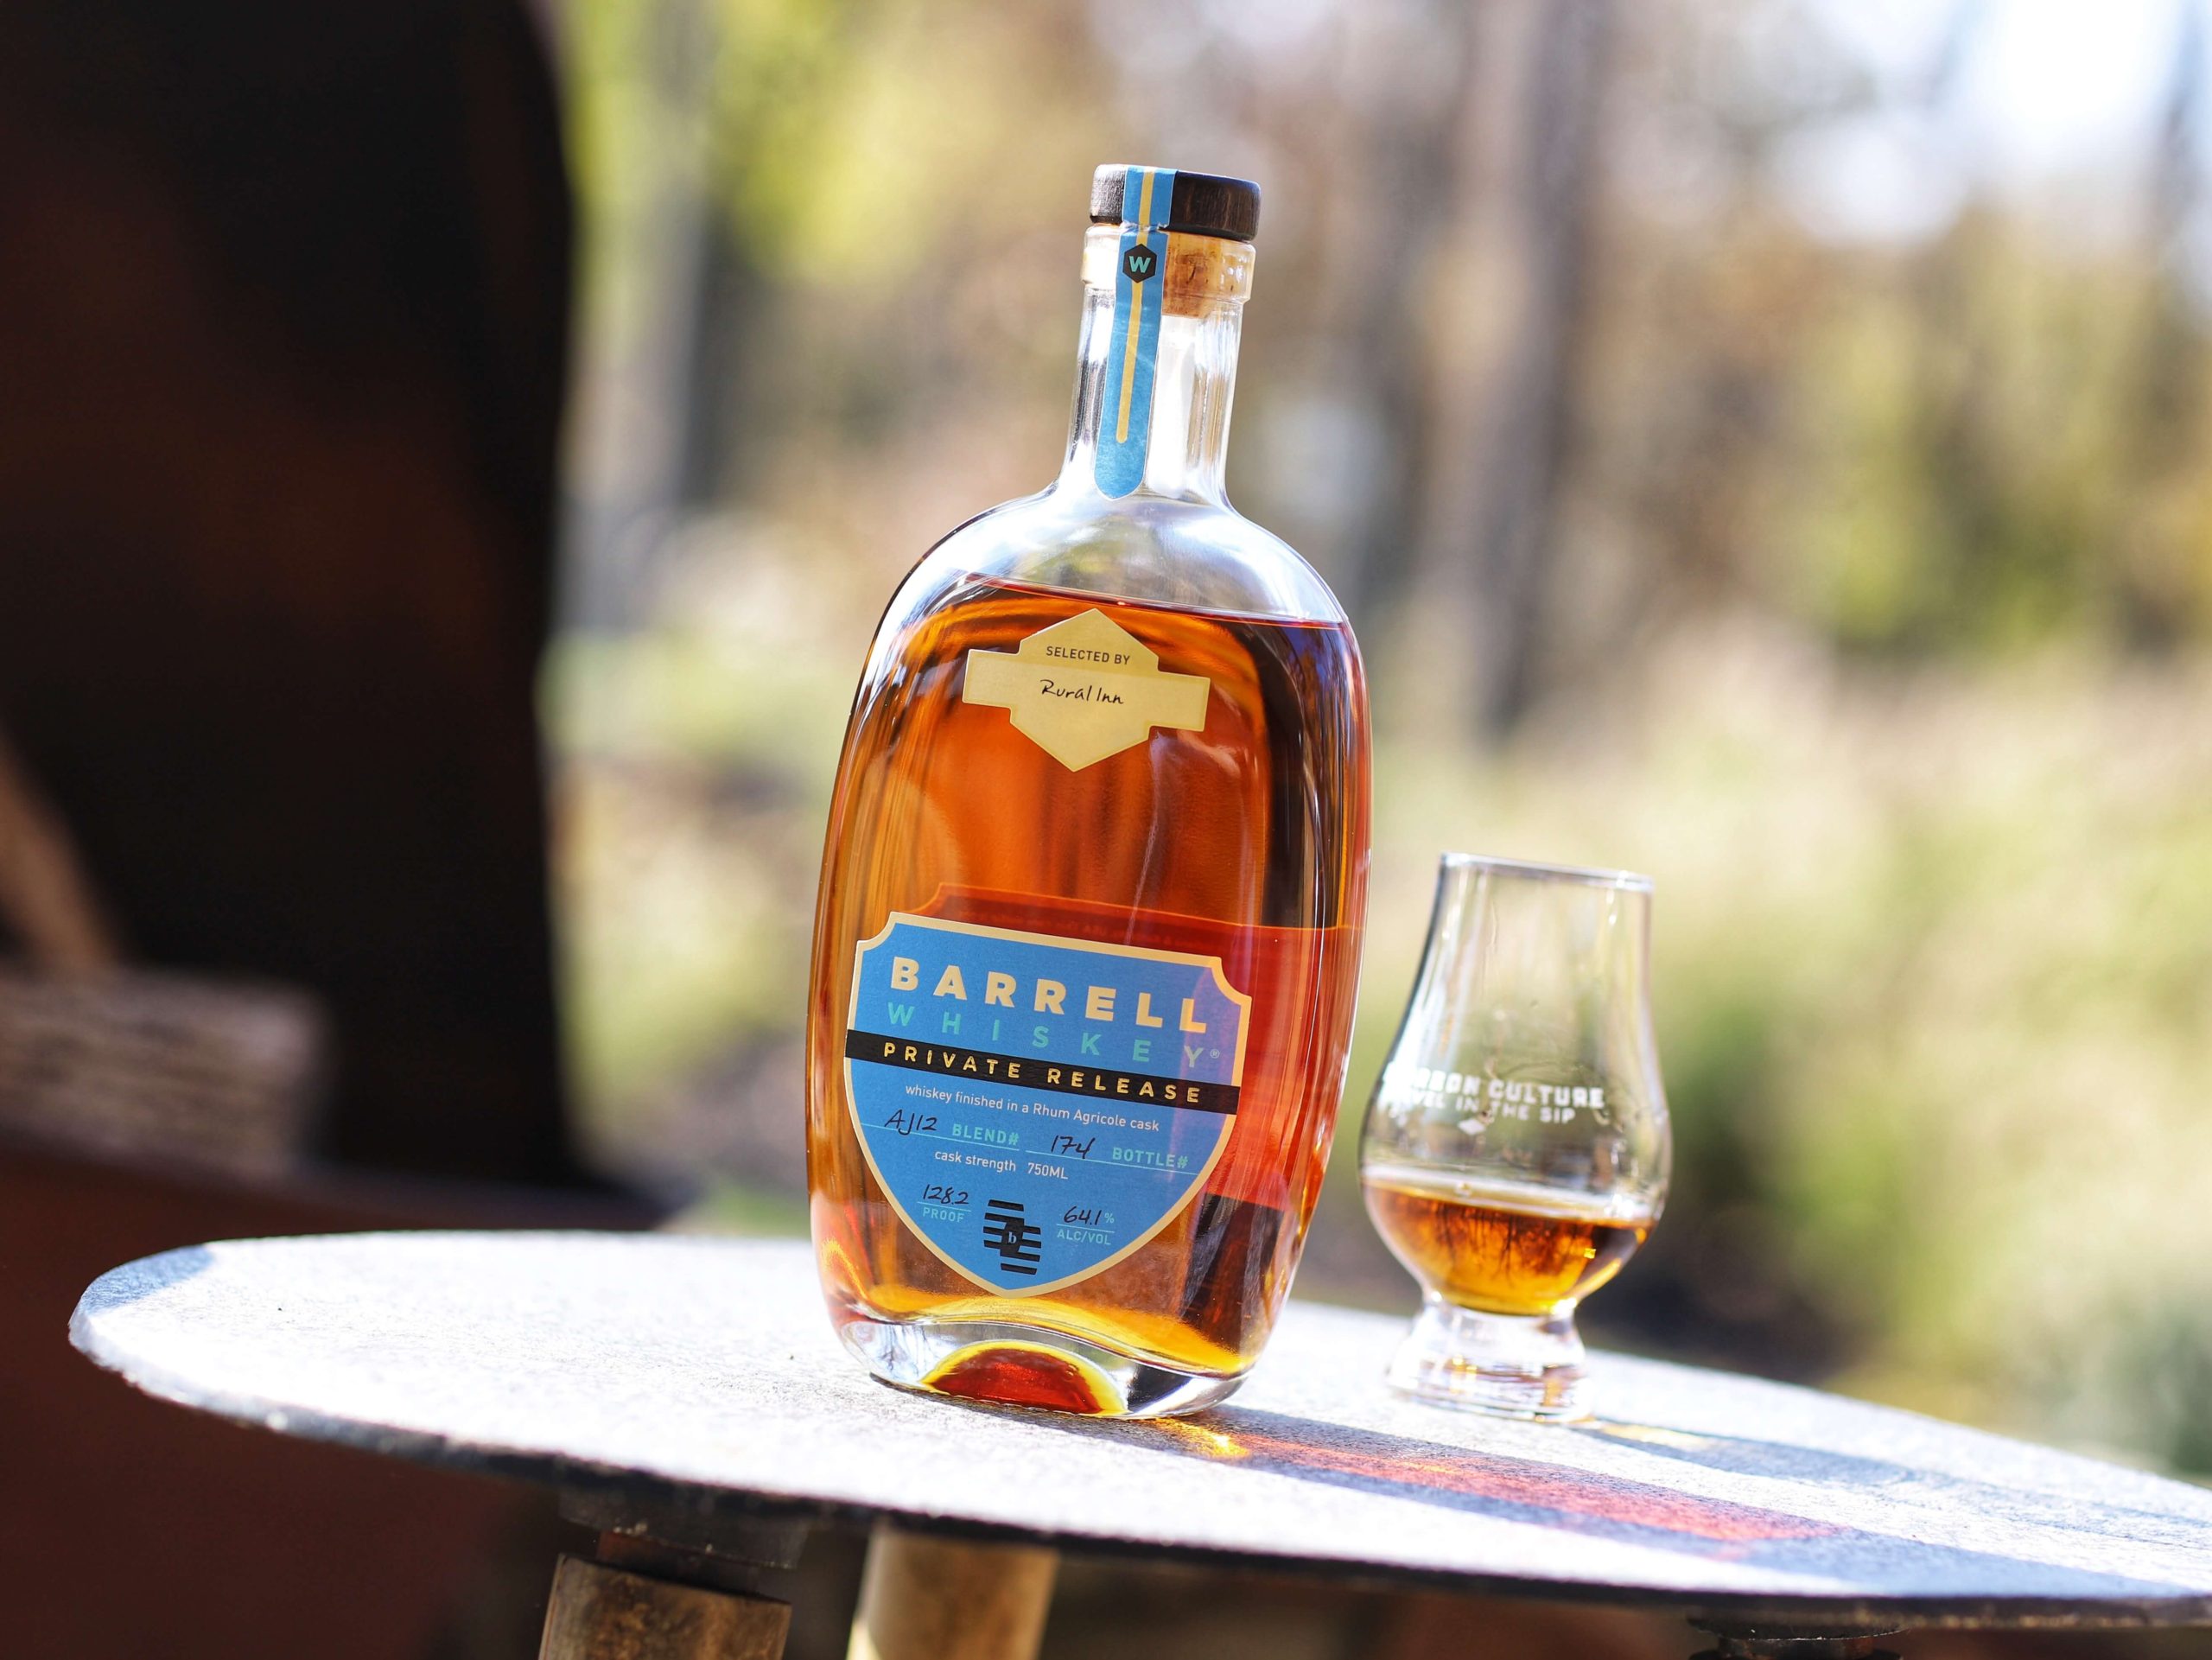 Barrell Special Release Single Barrel Whiskey finished in a Rhum Agricole Cask (Rural Inn, 2021) Review